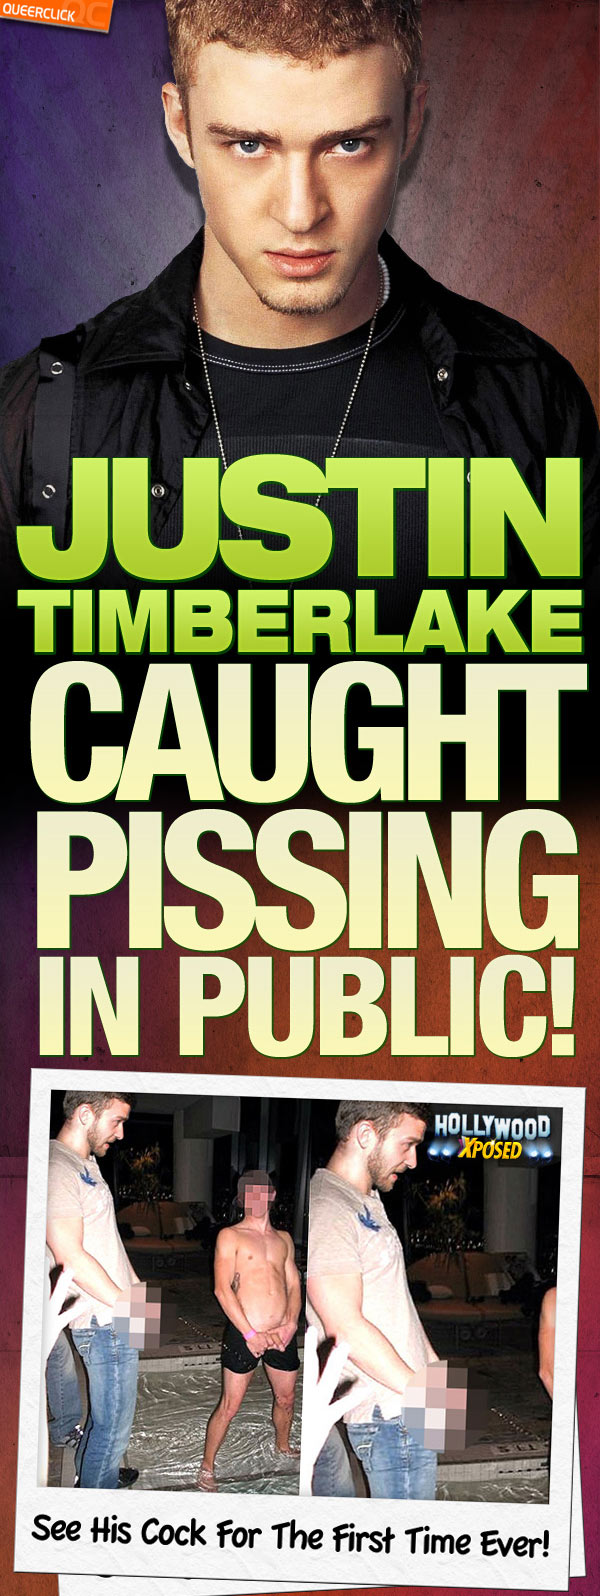 Hollywood-Xposed: Justin Timberlake - QueerClick.